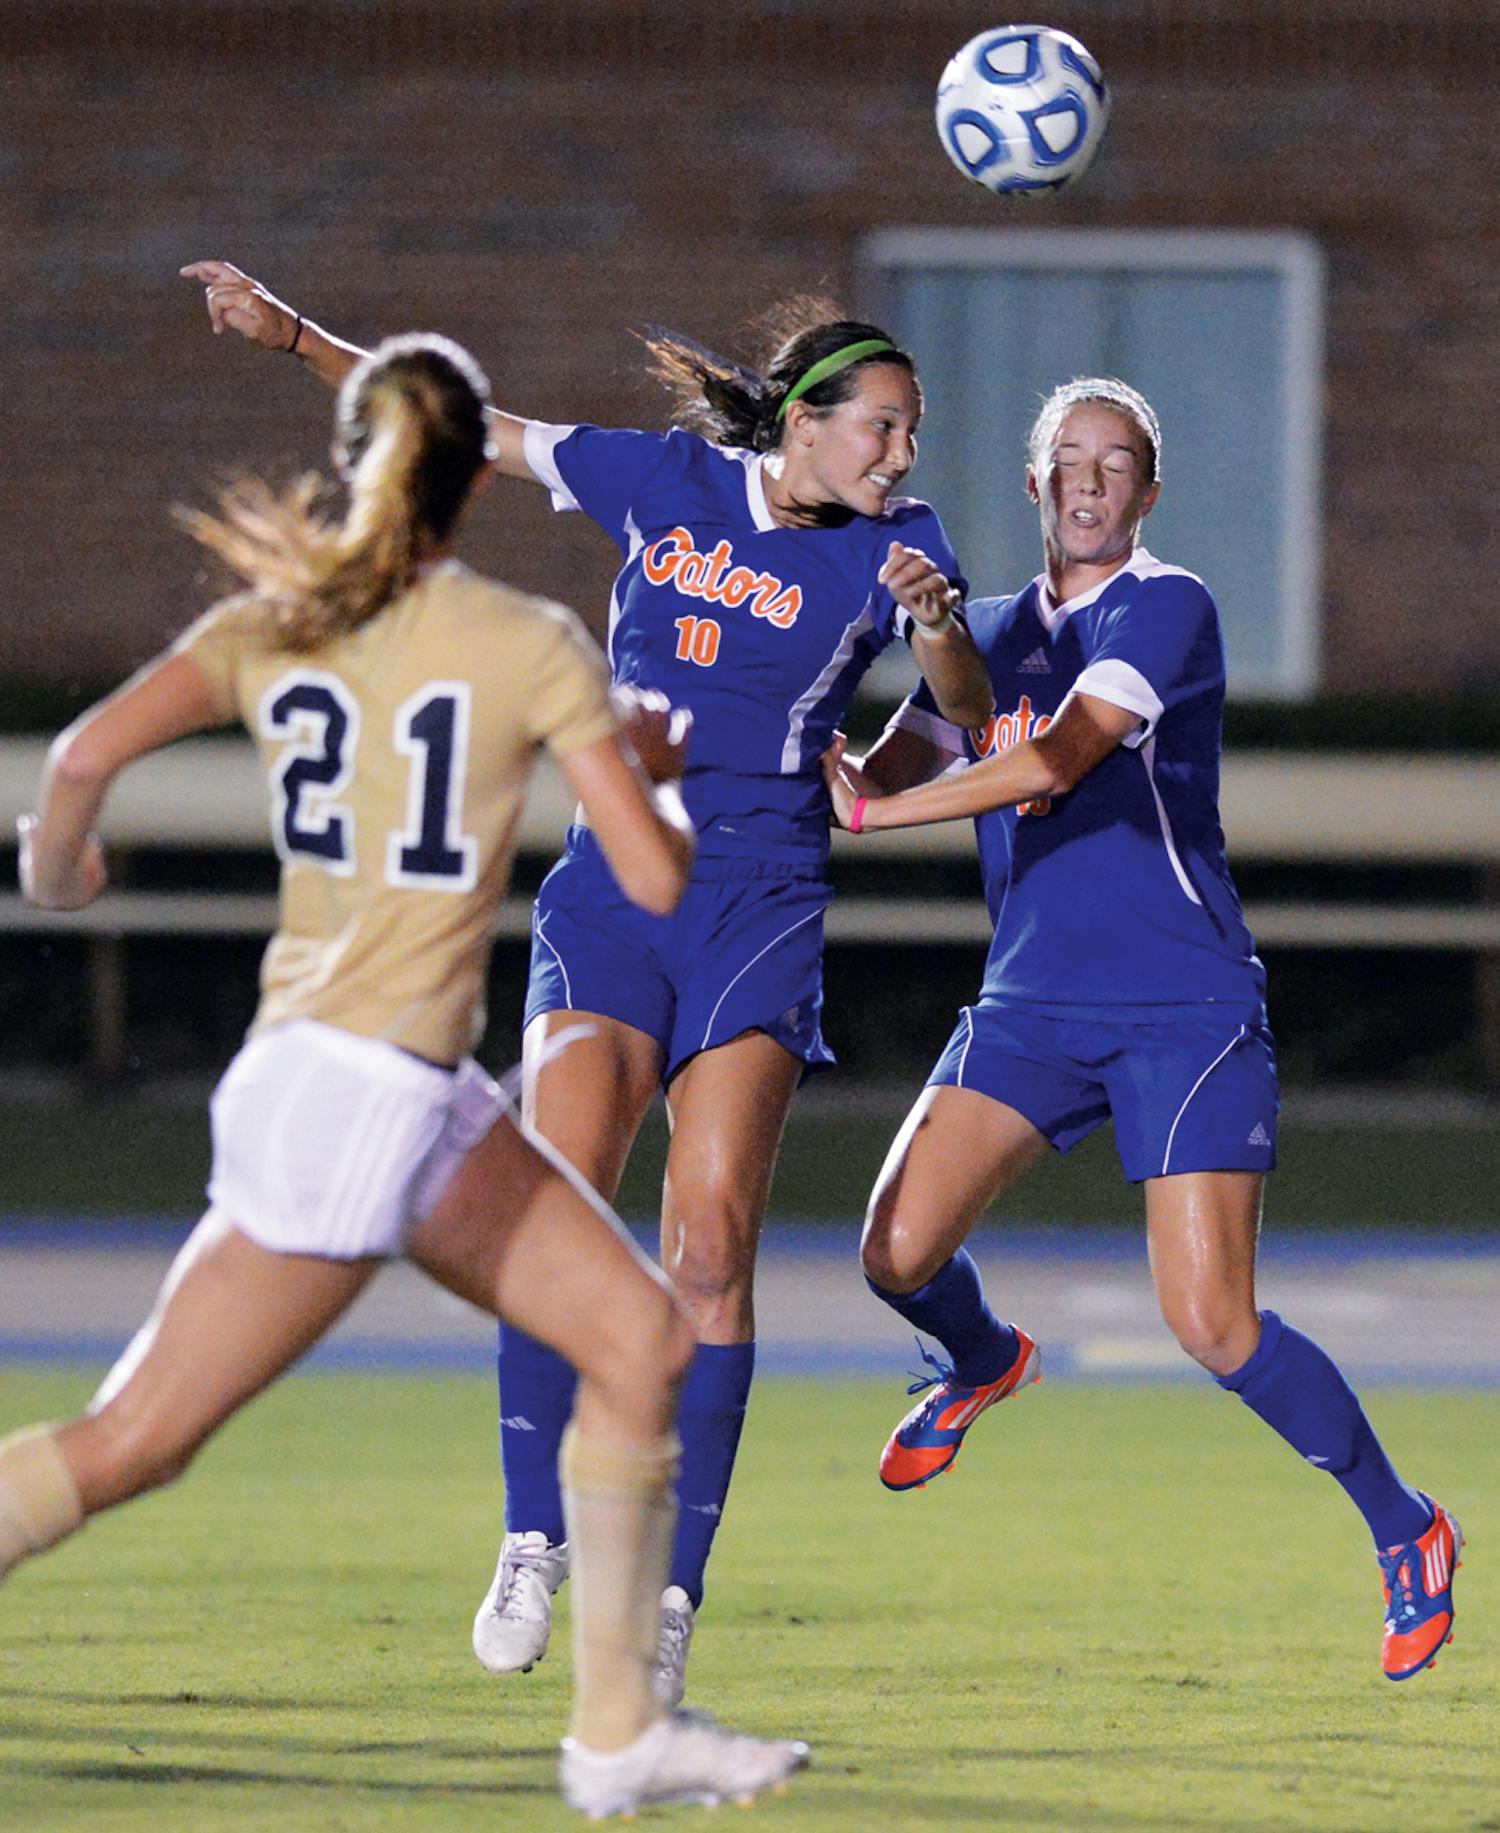 Midfielder Holly King (10) heads a ball during UF's 3-0 victory against Florida International University on Sept. 2. King works as an elementary school teacher at Levy County elementary school every Wednesday.